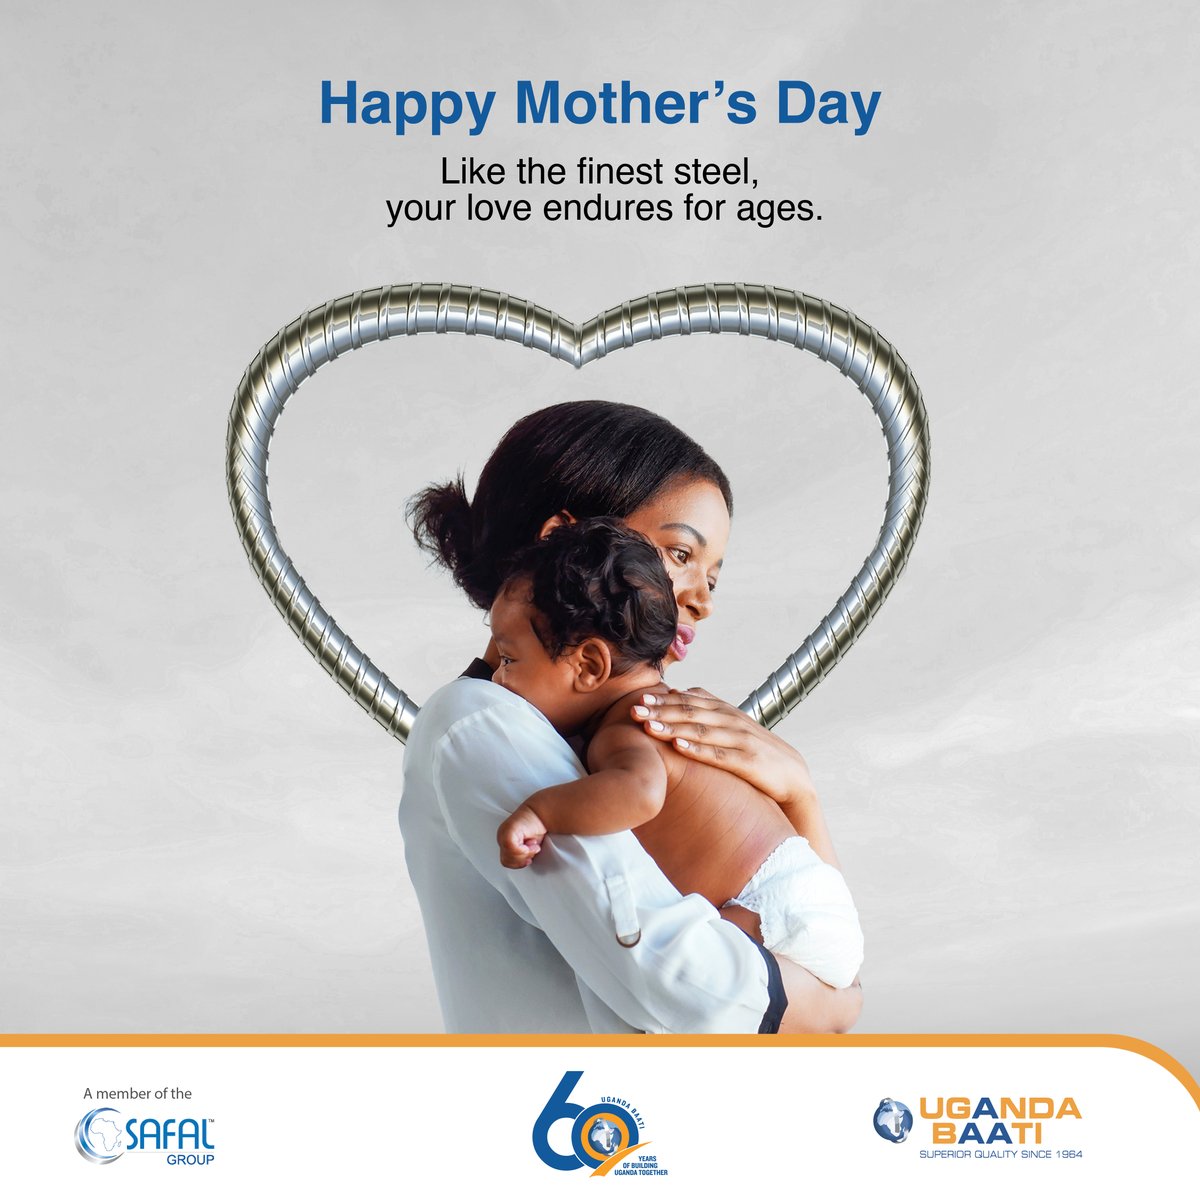 Happy Mother's Day to all mothers of our nation. We love you ❤️ #MothersDay #UgandaBaatiAt60 #SuperiorQualitySince1964